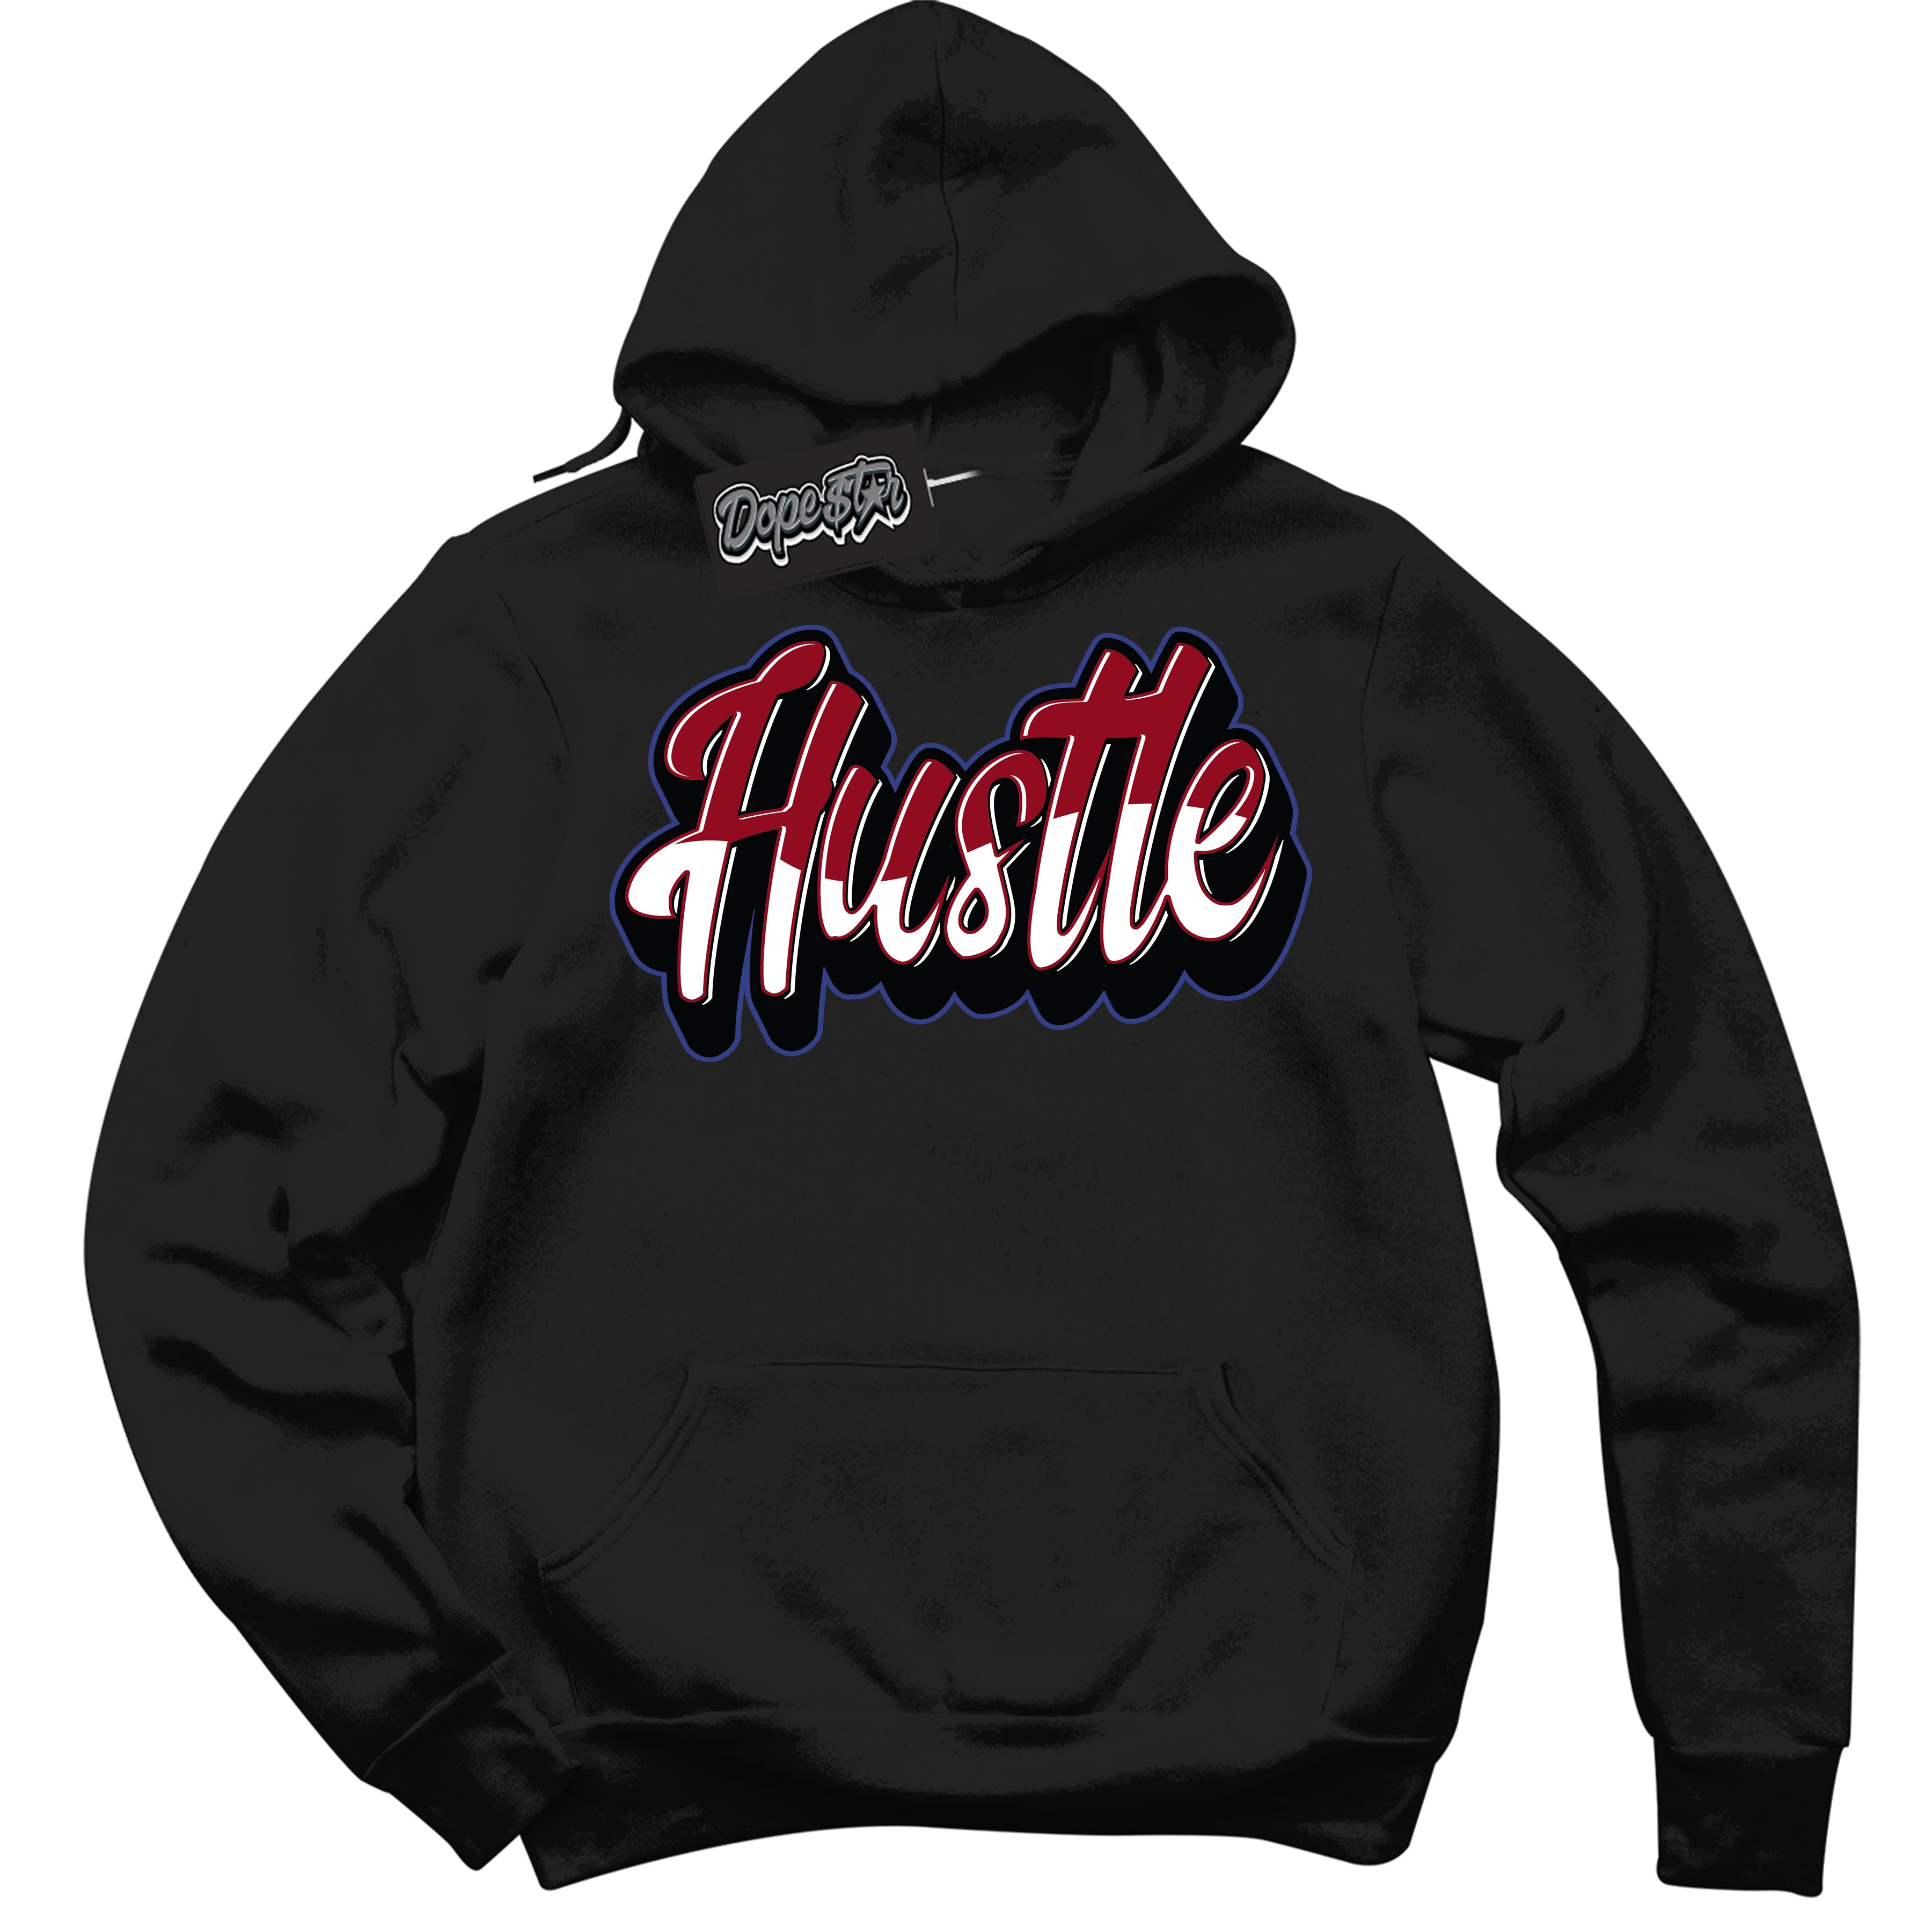 Cool Black Hoodie with “ Hustle ”  design that Perfectly Matches Playoffs 8s Sneakers.